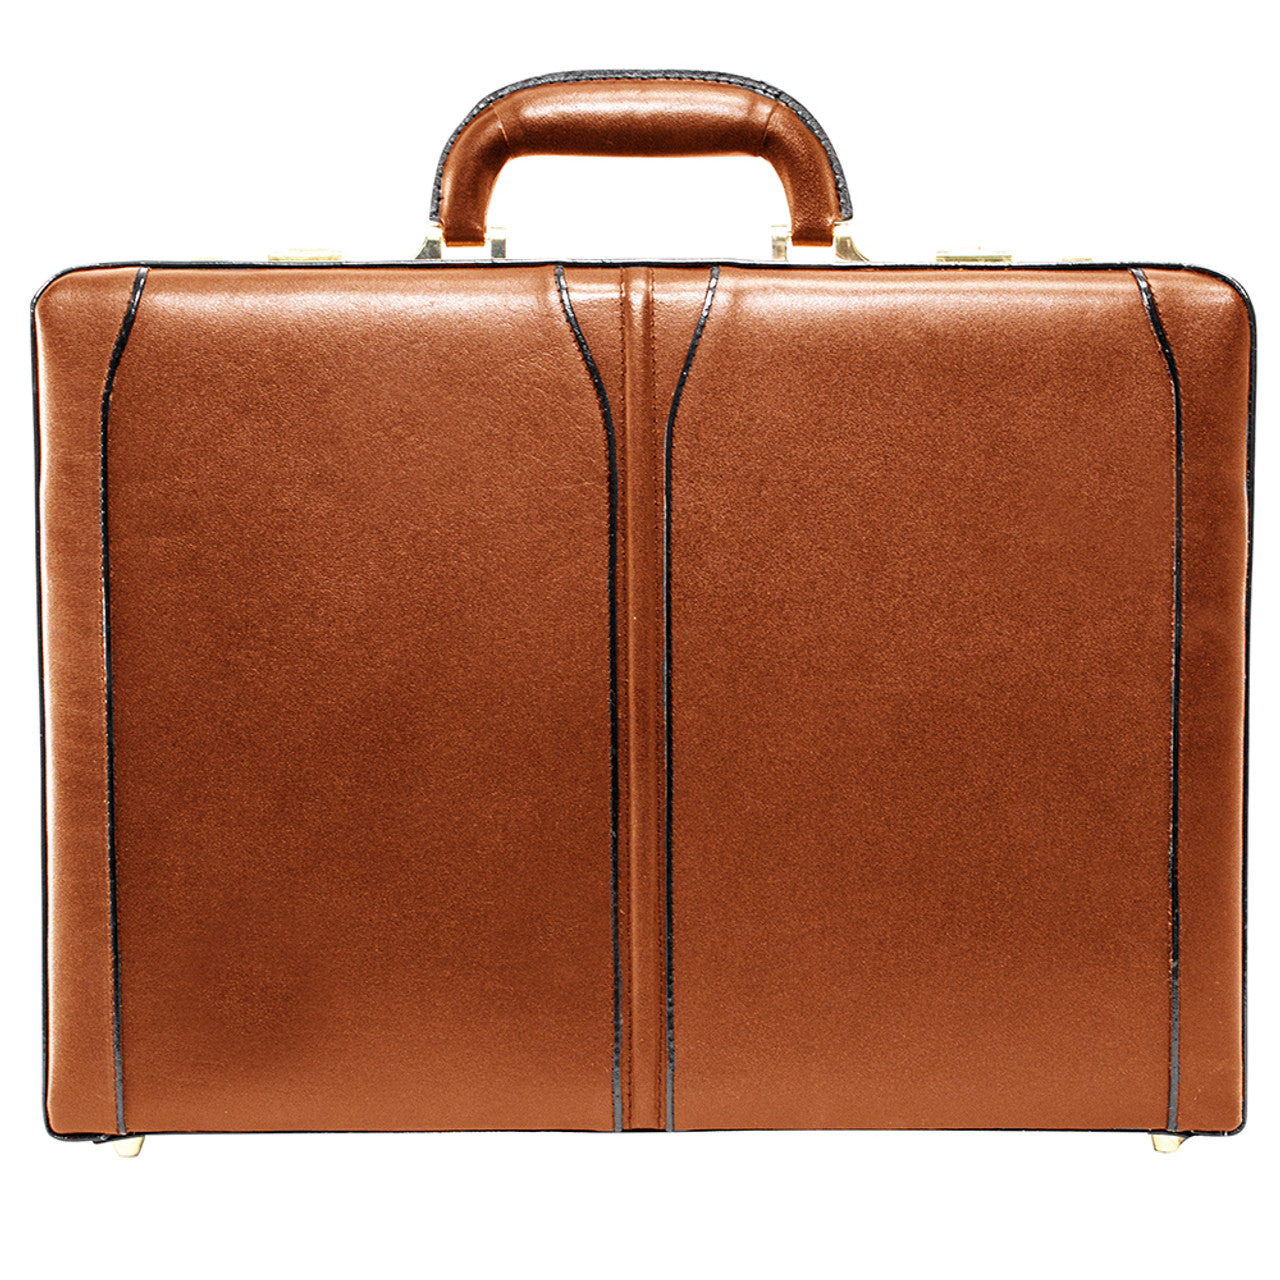 Turner Leather Expandable Attache Case - Leather Loom